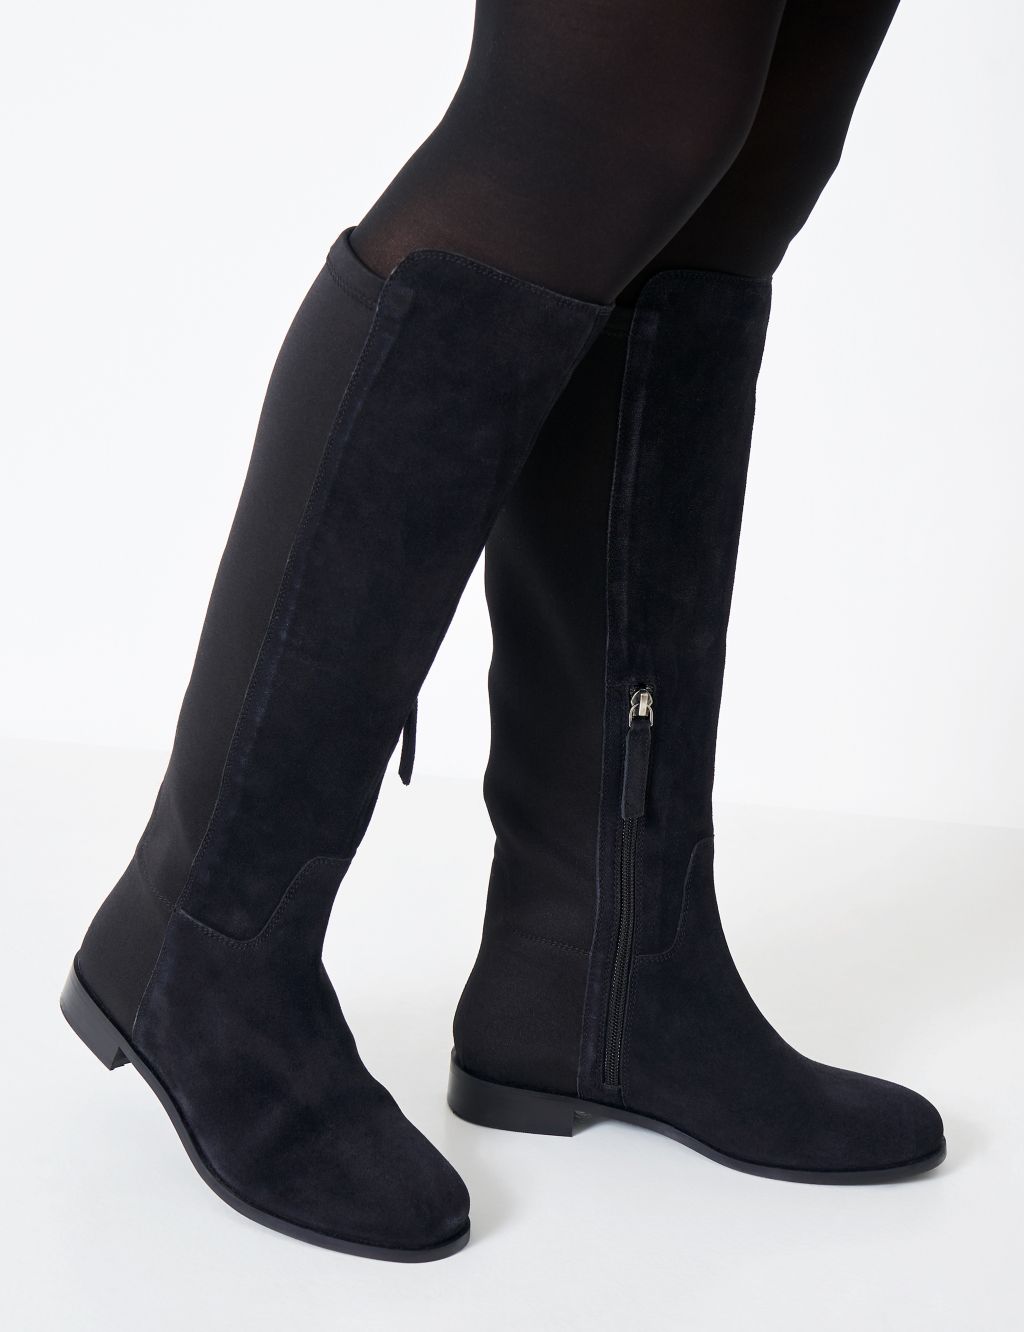 Suede Flat Knee High Boots image 1